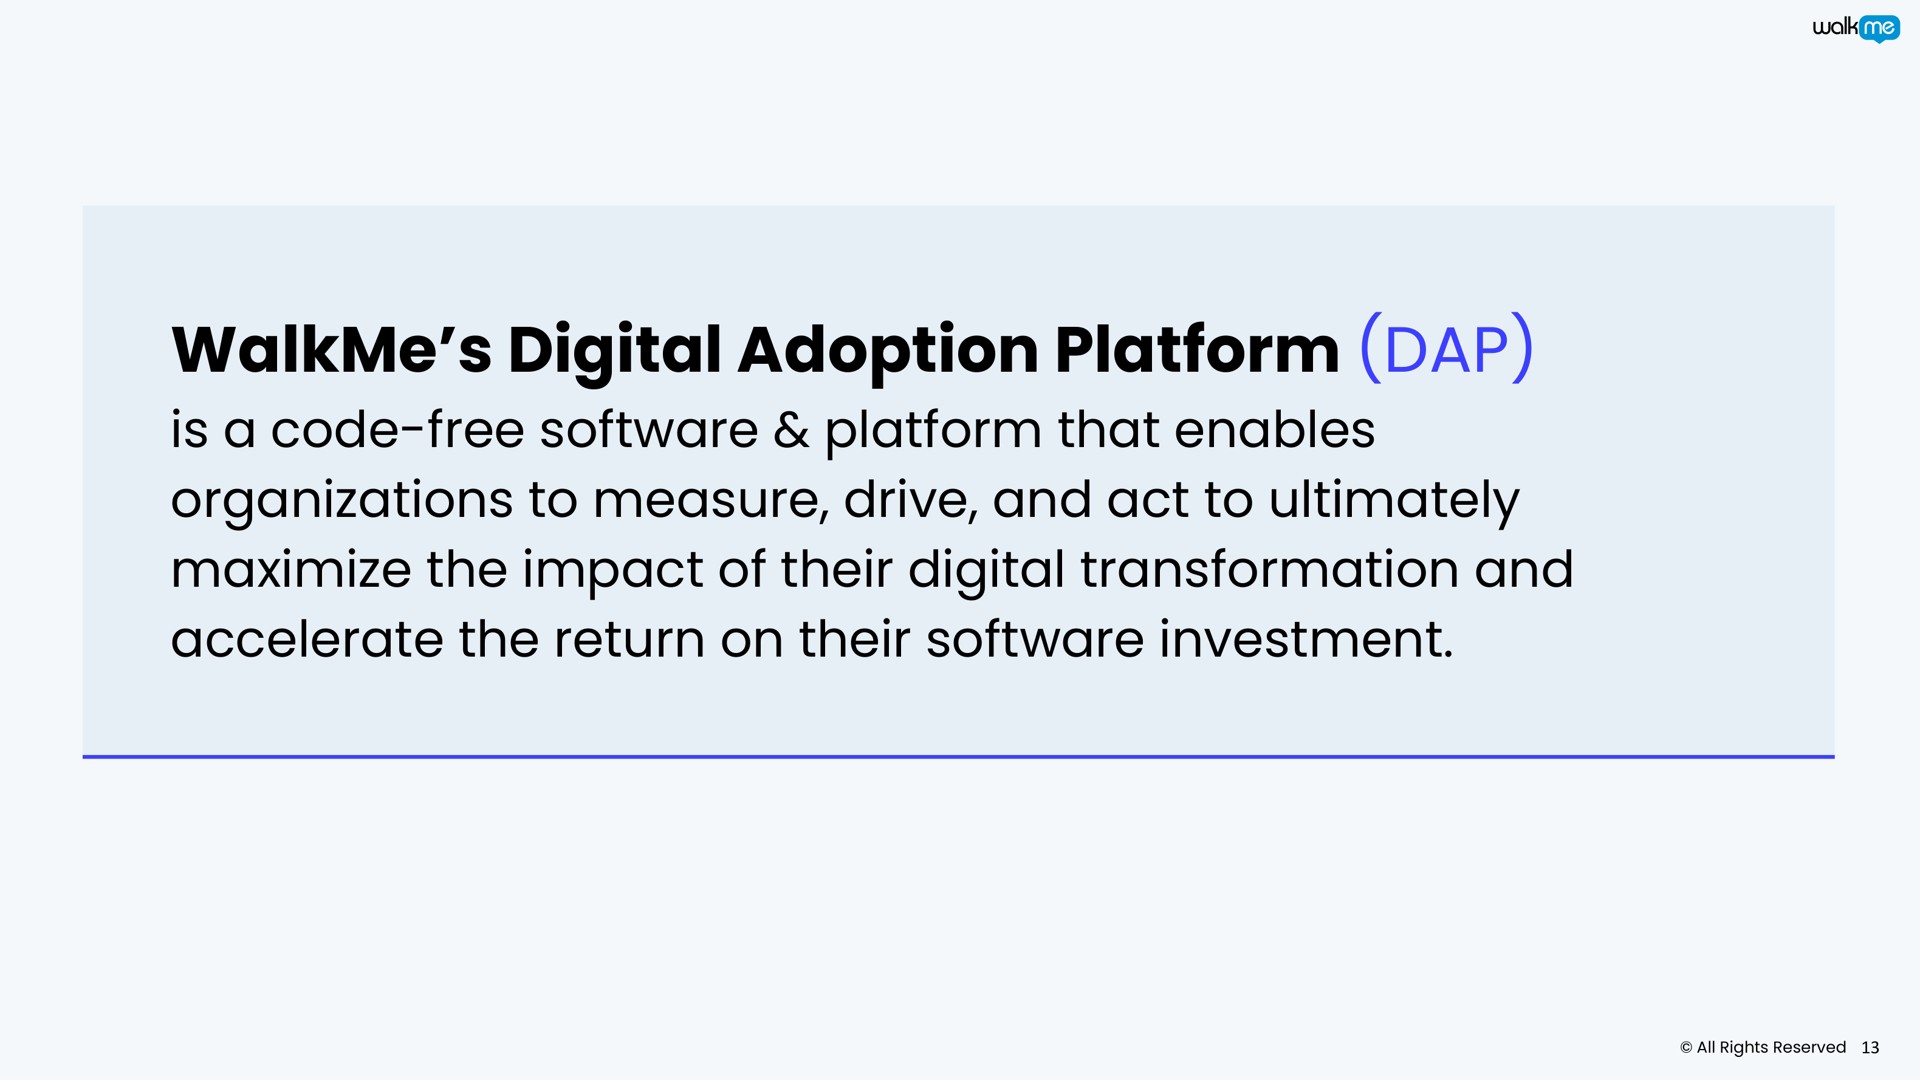 digital adoption platform dap is a code free platform that enables organizations to measure drive and act to ultimately maximize the impact of their digital transformation and accelerate the return on their investment | Walkme